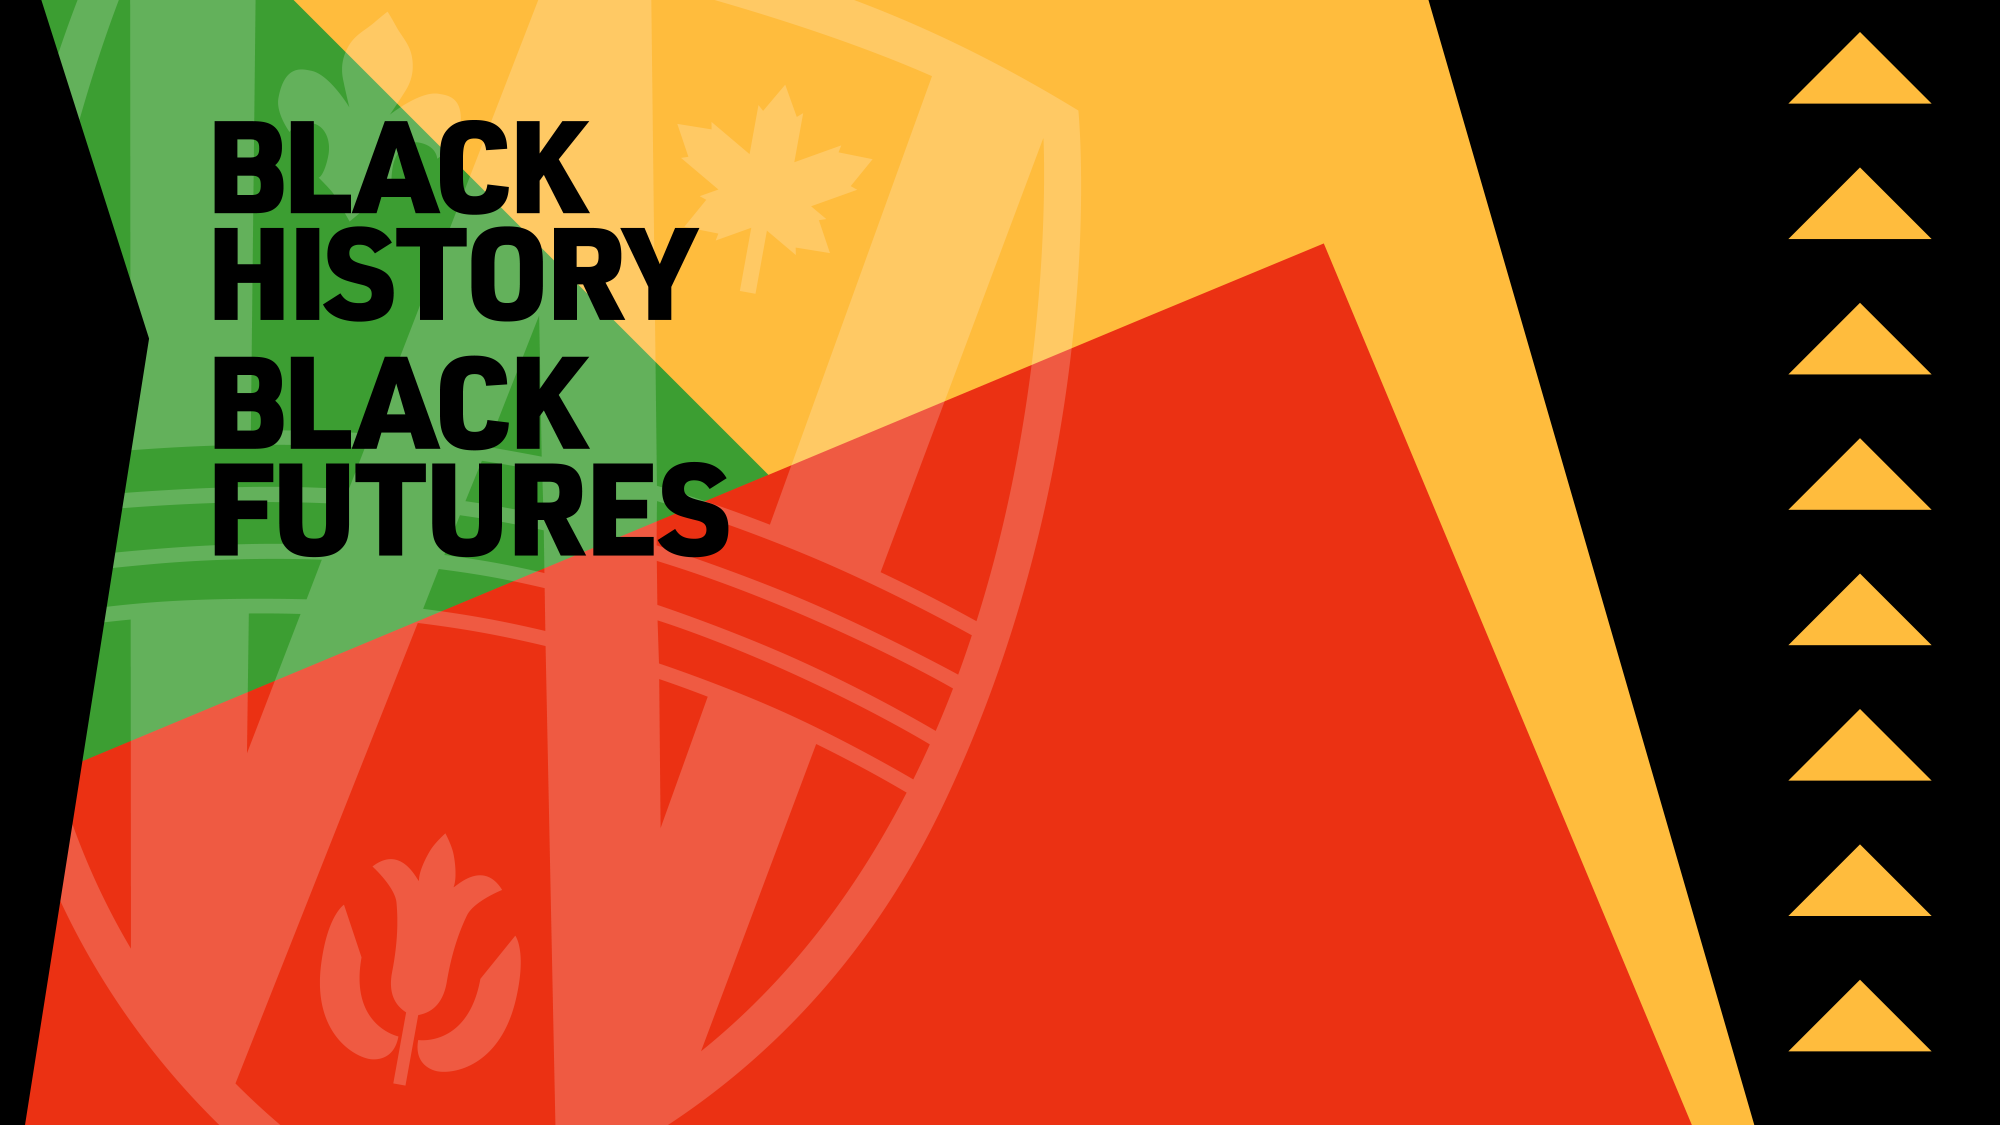 Green red yellow and black graphic with UWindsor shield logo and text Black history Black futures